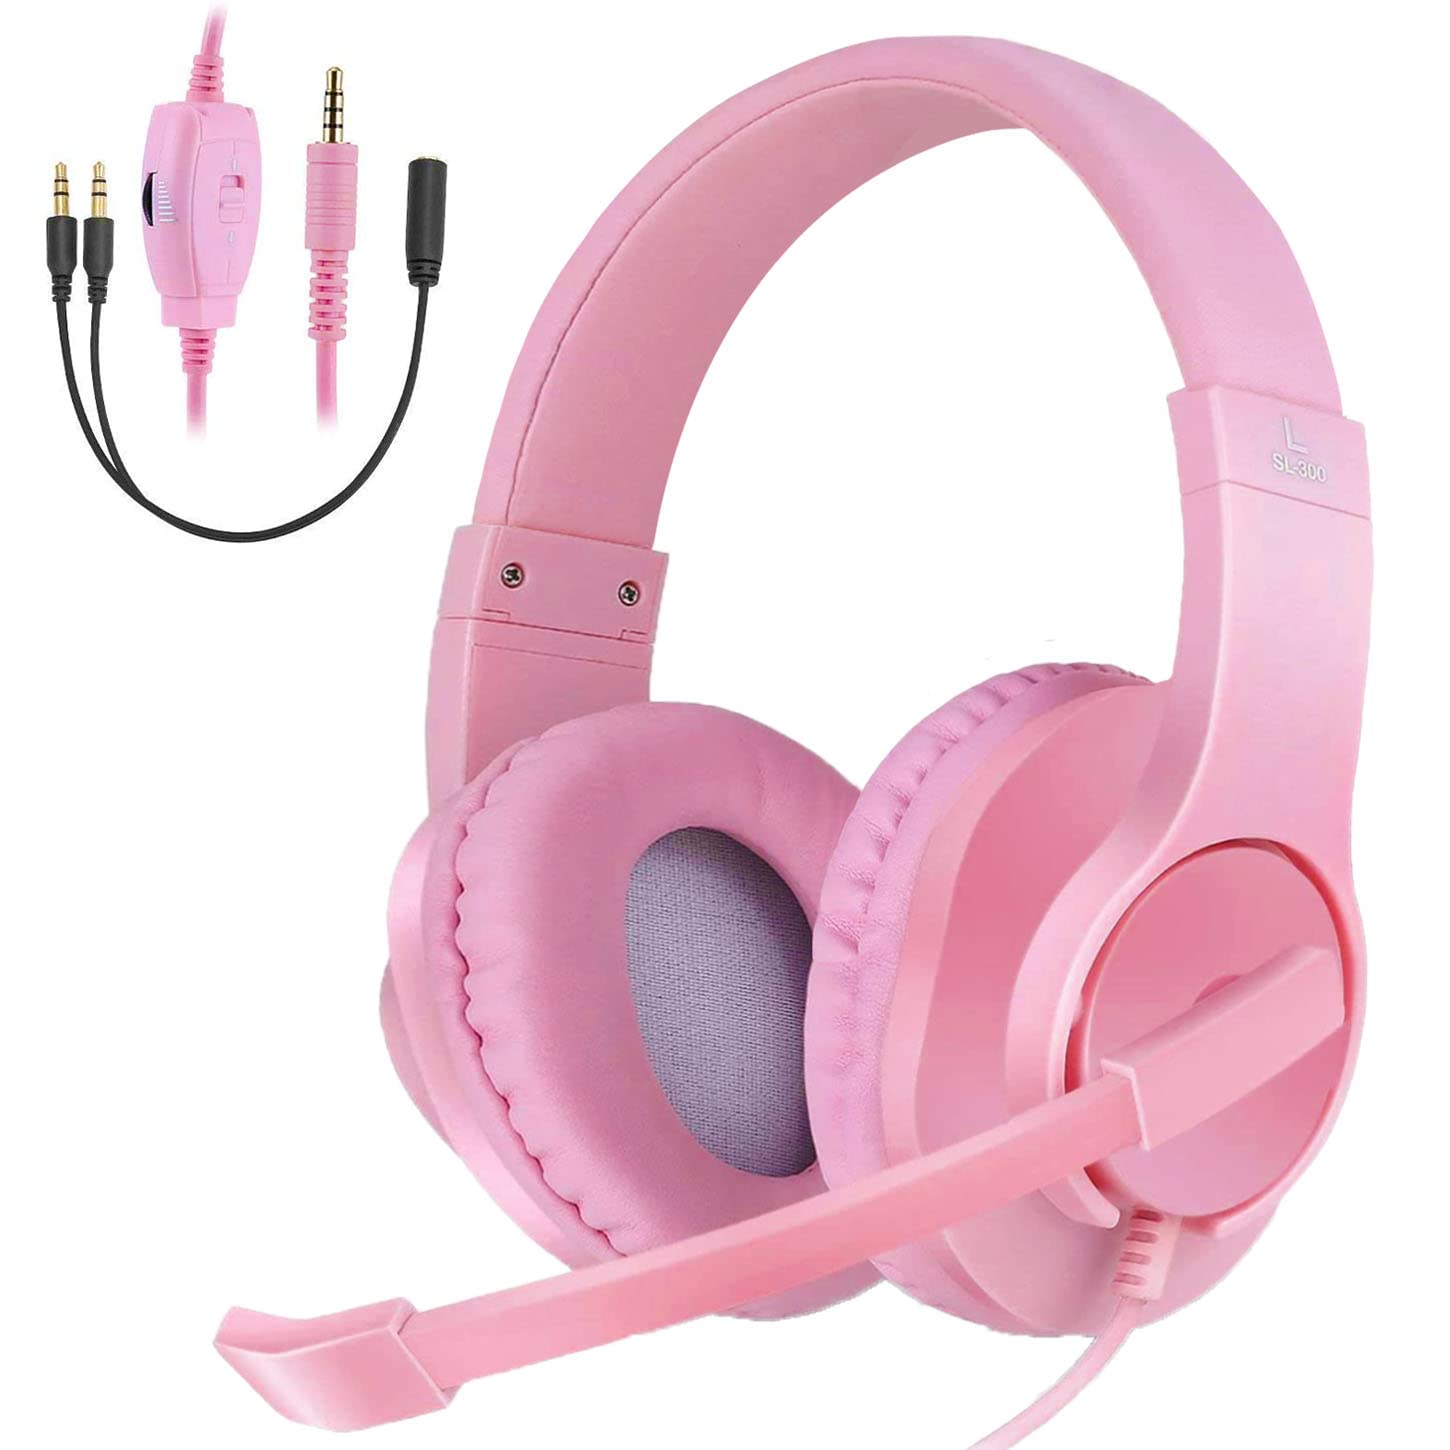 Gaming Headset for Xbox One, PS4, Nintendo Switch, DIWUER Bass Surround and Noise Cancelling 3.5mm Over Ear Headphones with Mic for Laptop PC Smartphones, Pink